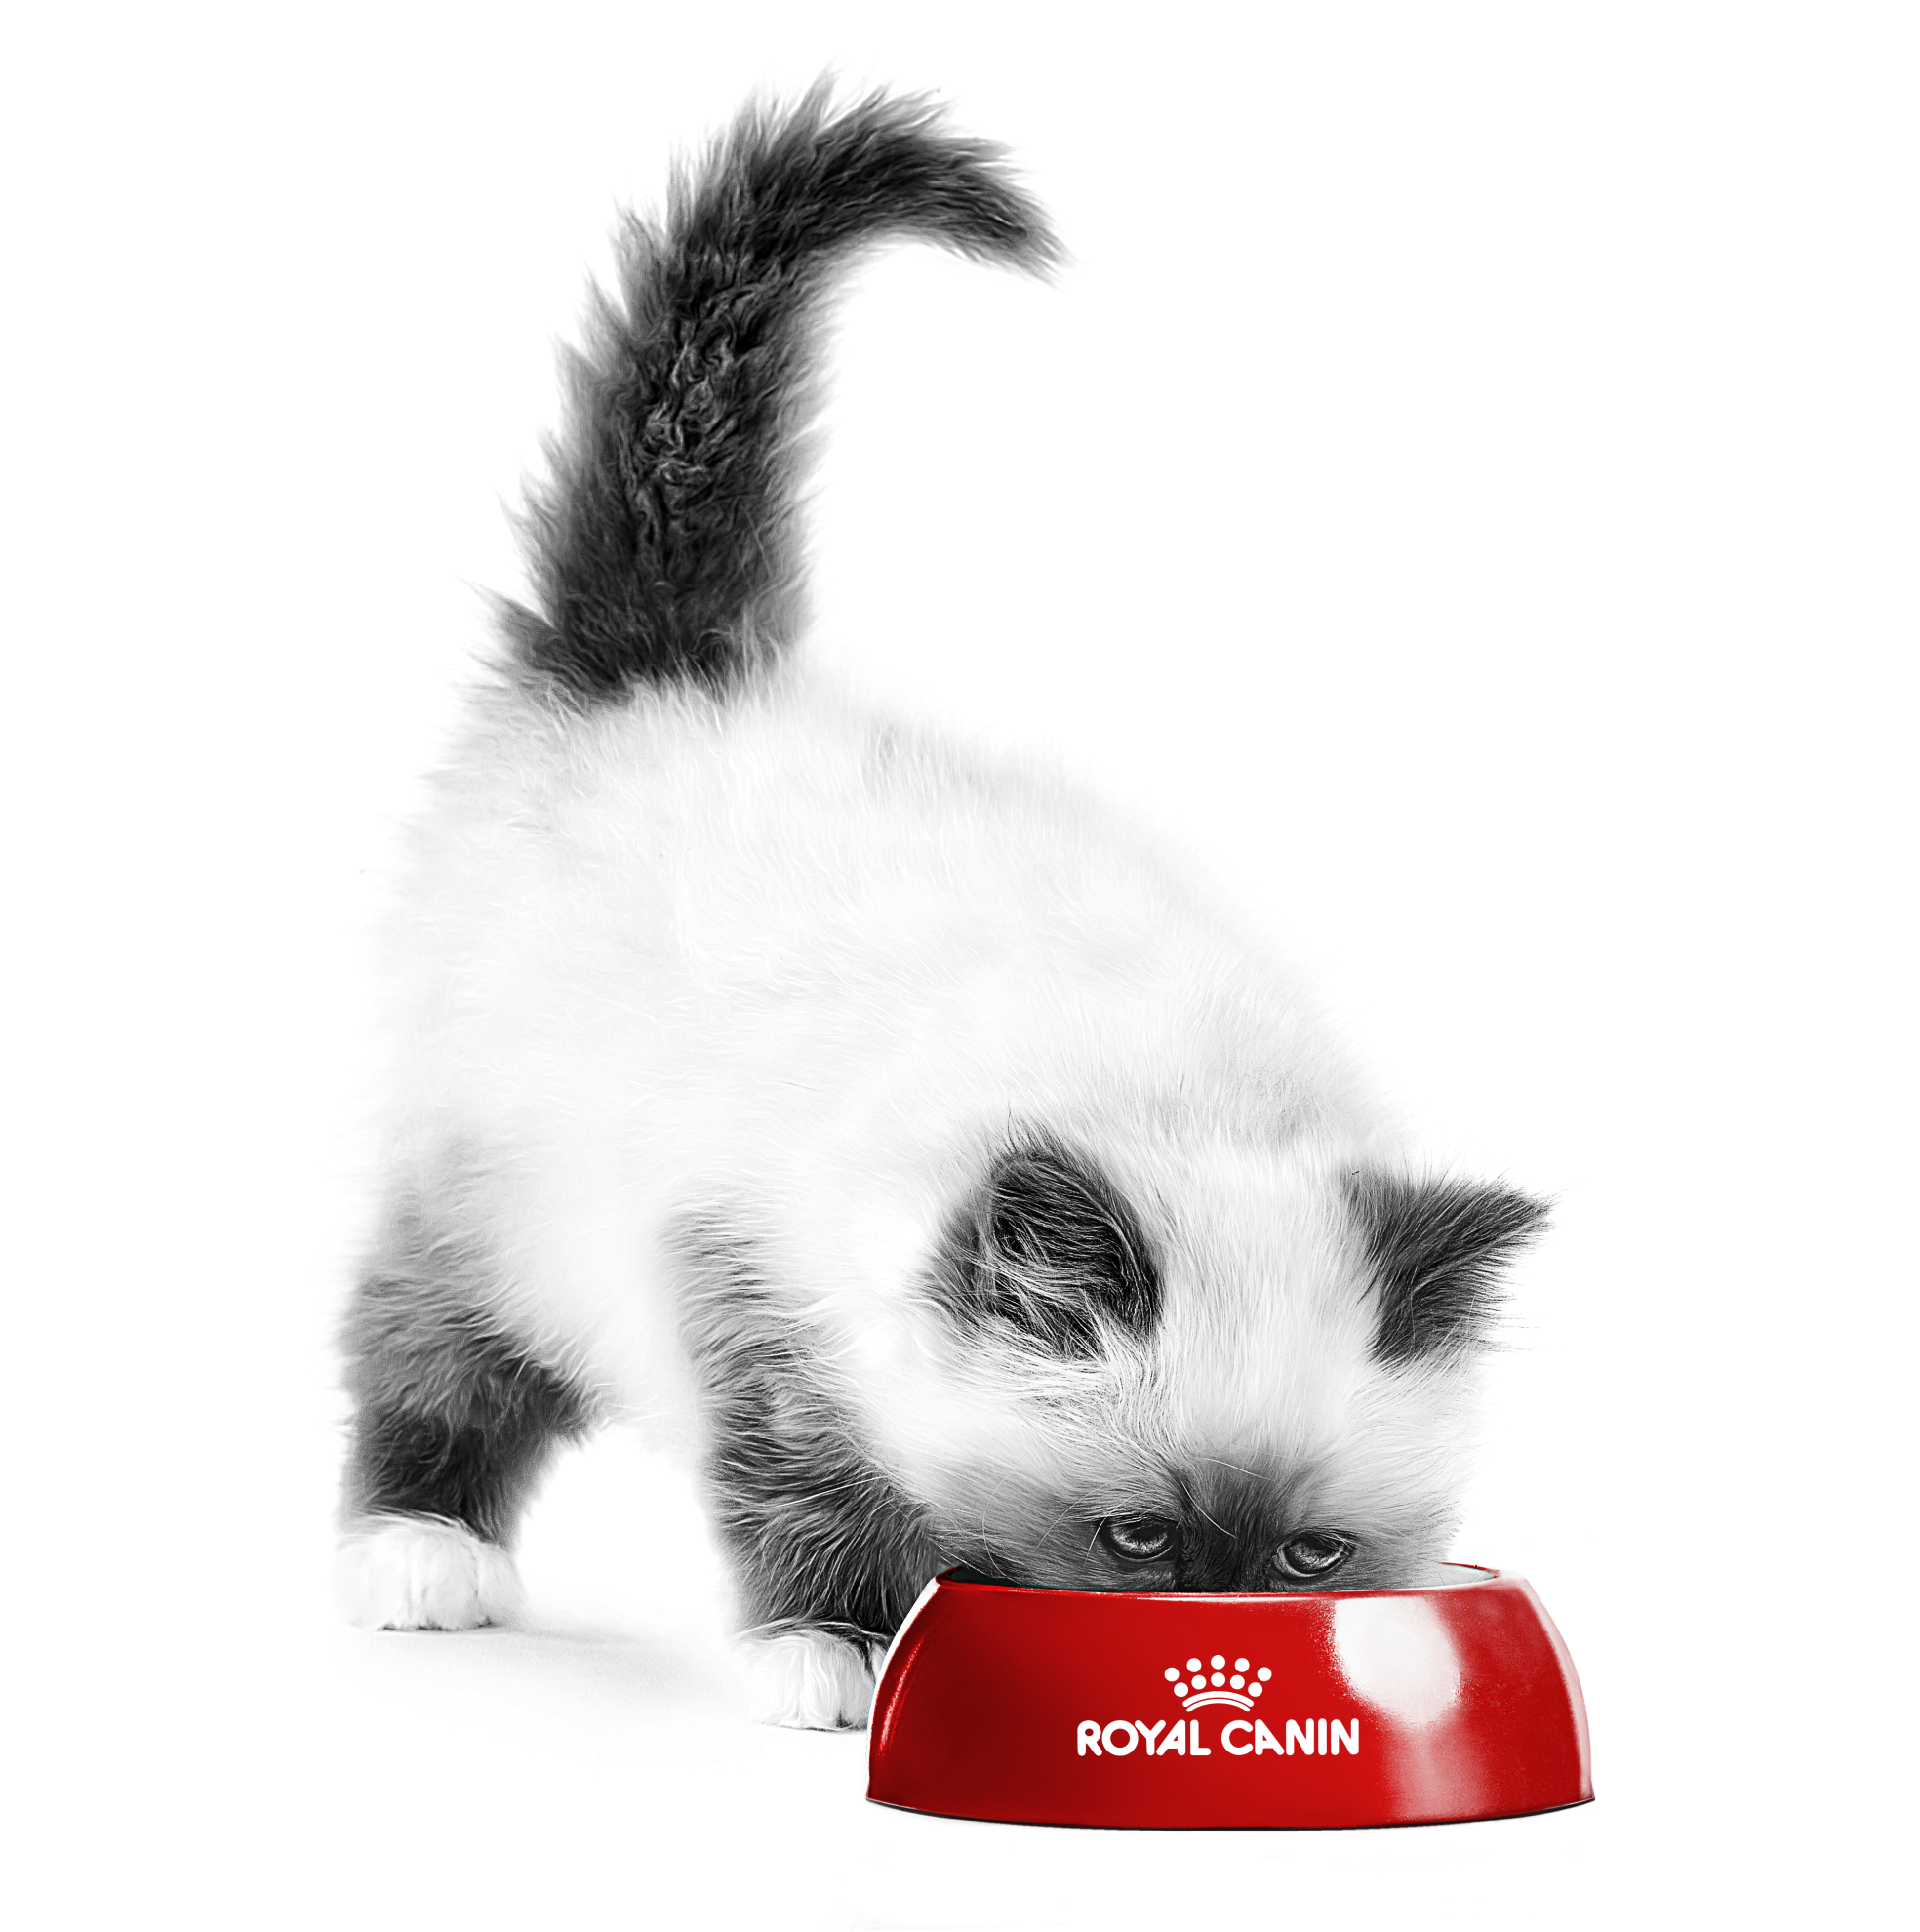 Black and white british shorthair cat eating from red bowl